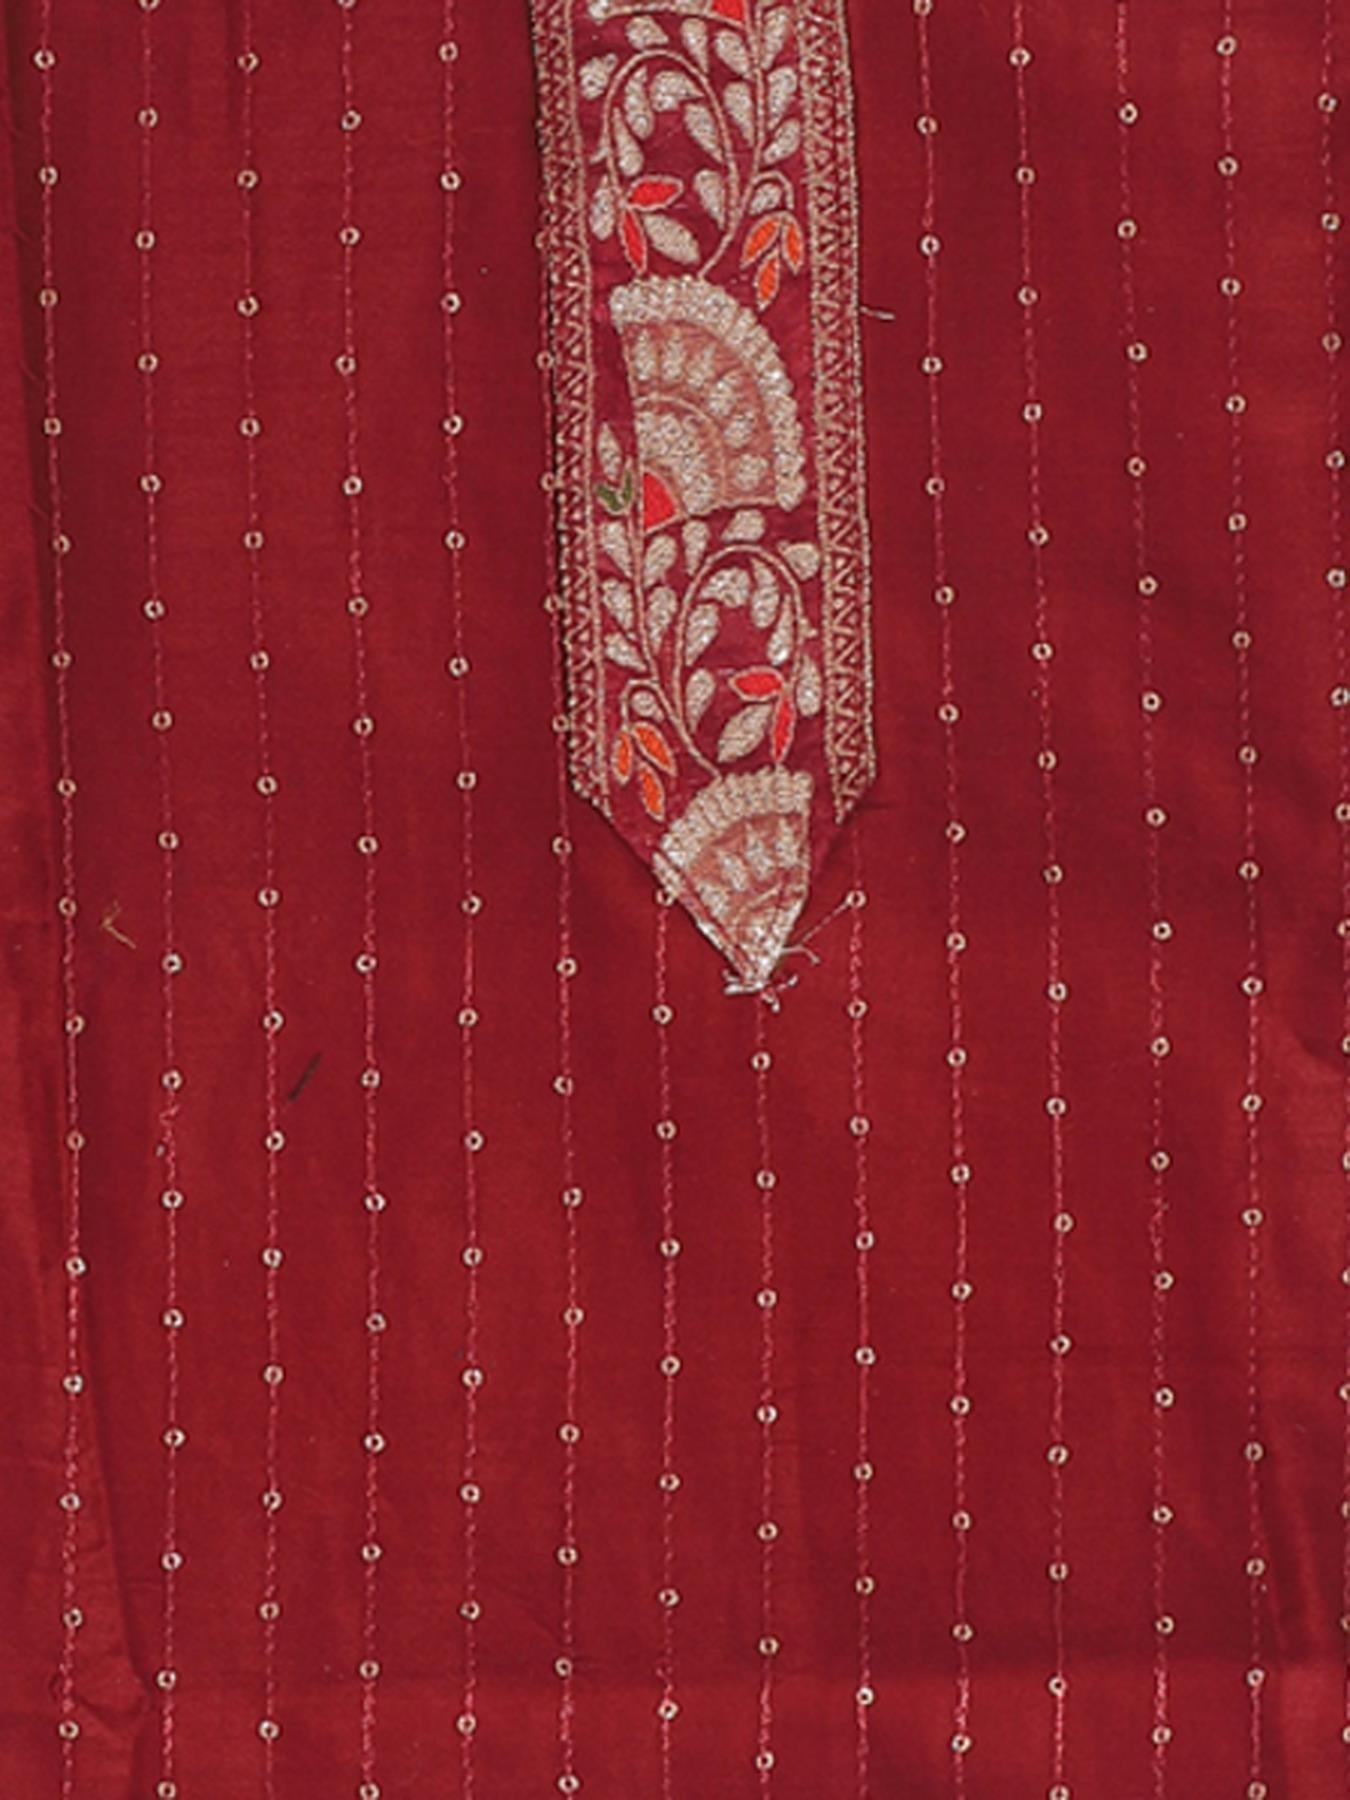 Red Embellished Unstitch Dress Material with Dupatta